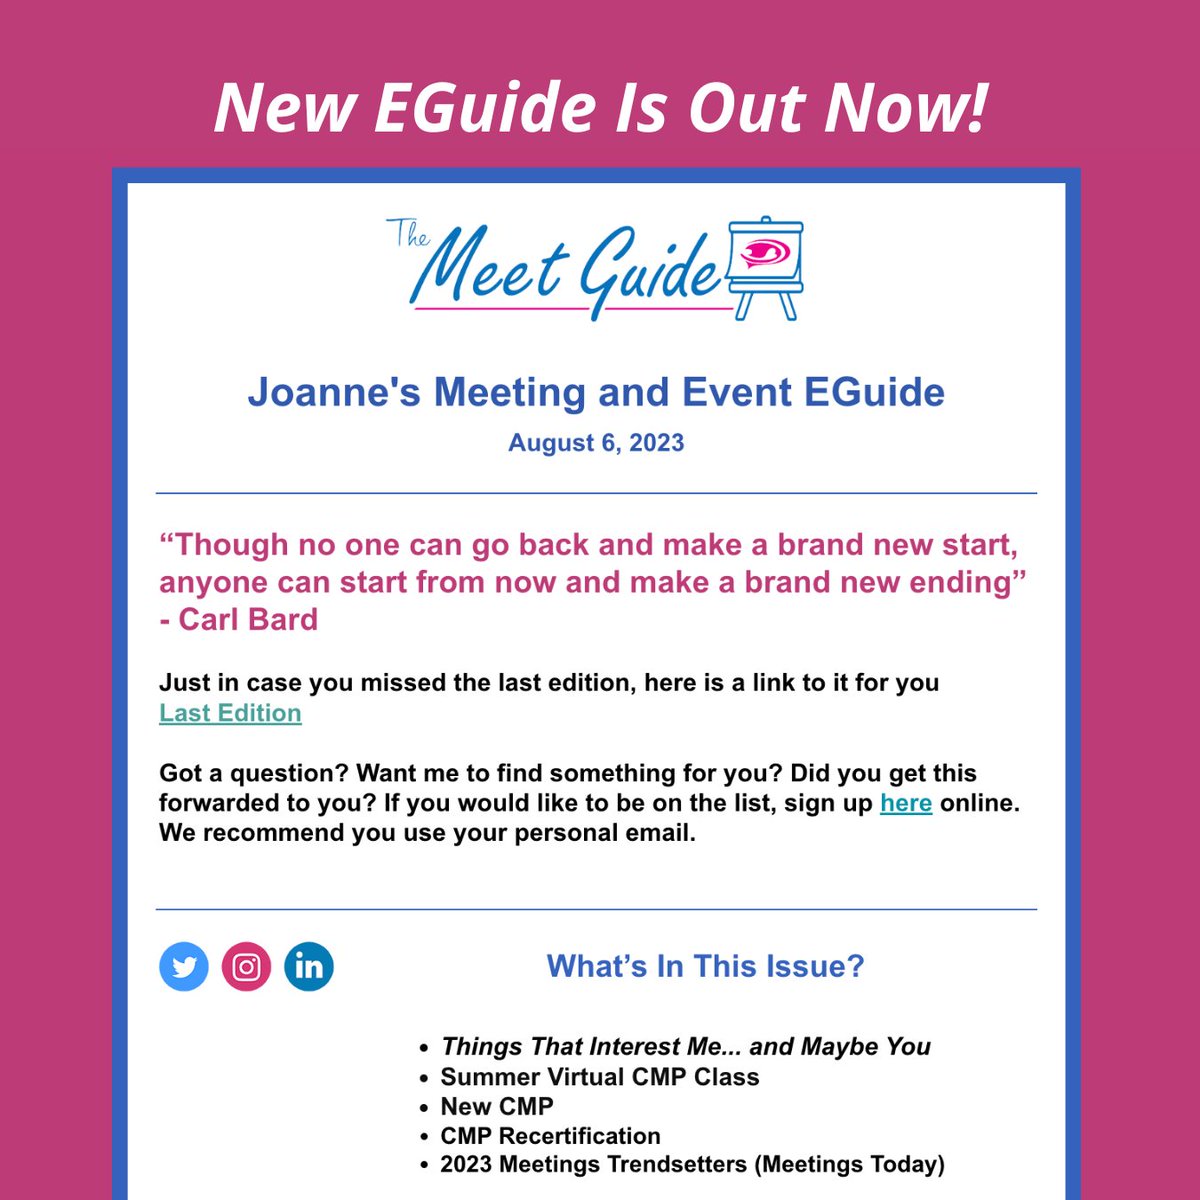 A new edition of my Meeting and Event EGuide is out! Check your inbox or click the link to view it now: conta.cc/3Ot9WQX

Want to join our mailing list? Sign up here: ow.ly/yKIb50NyX82

#themeetguide #cmp #meetingsandevents #meetingprofs #eventprofs #miceindustry